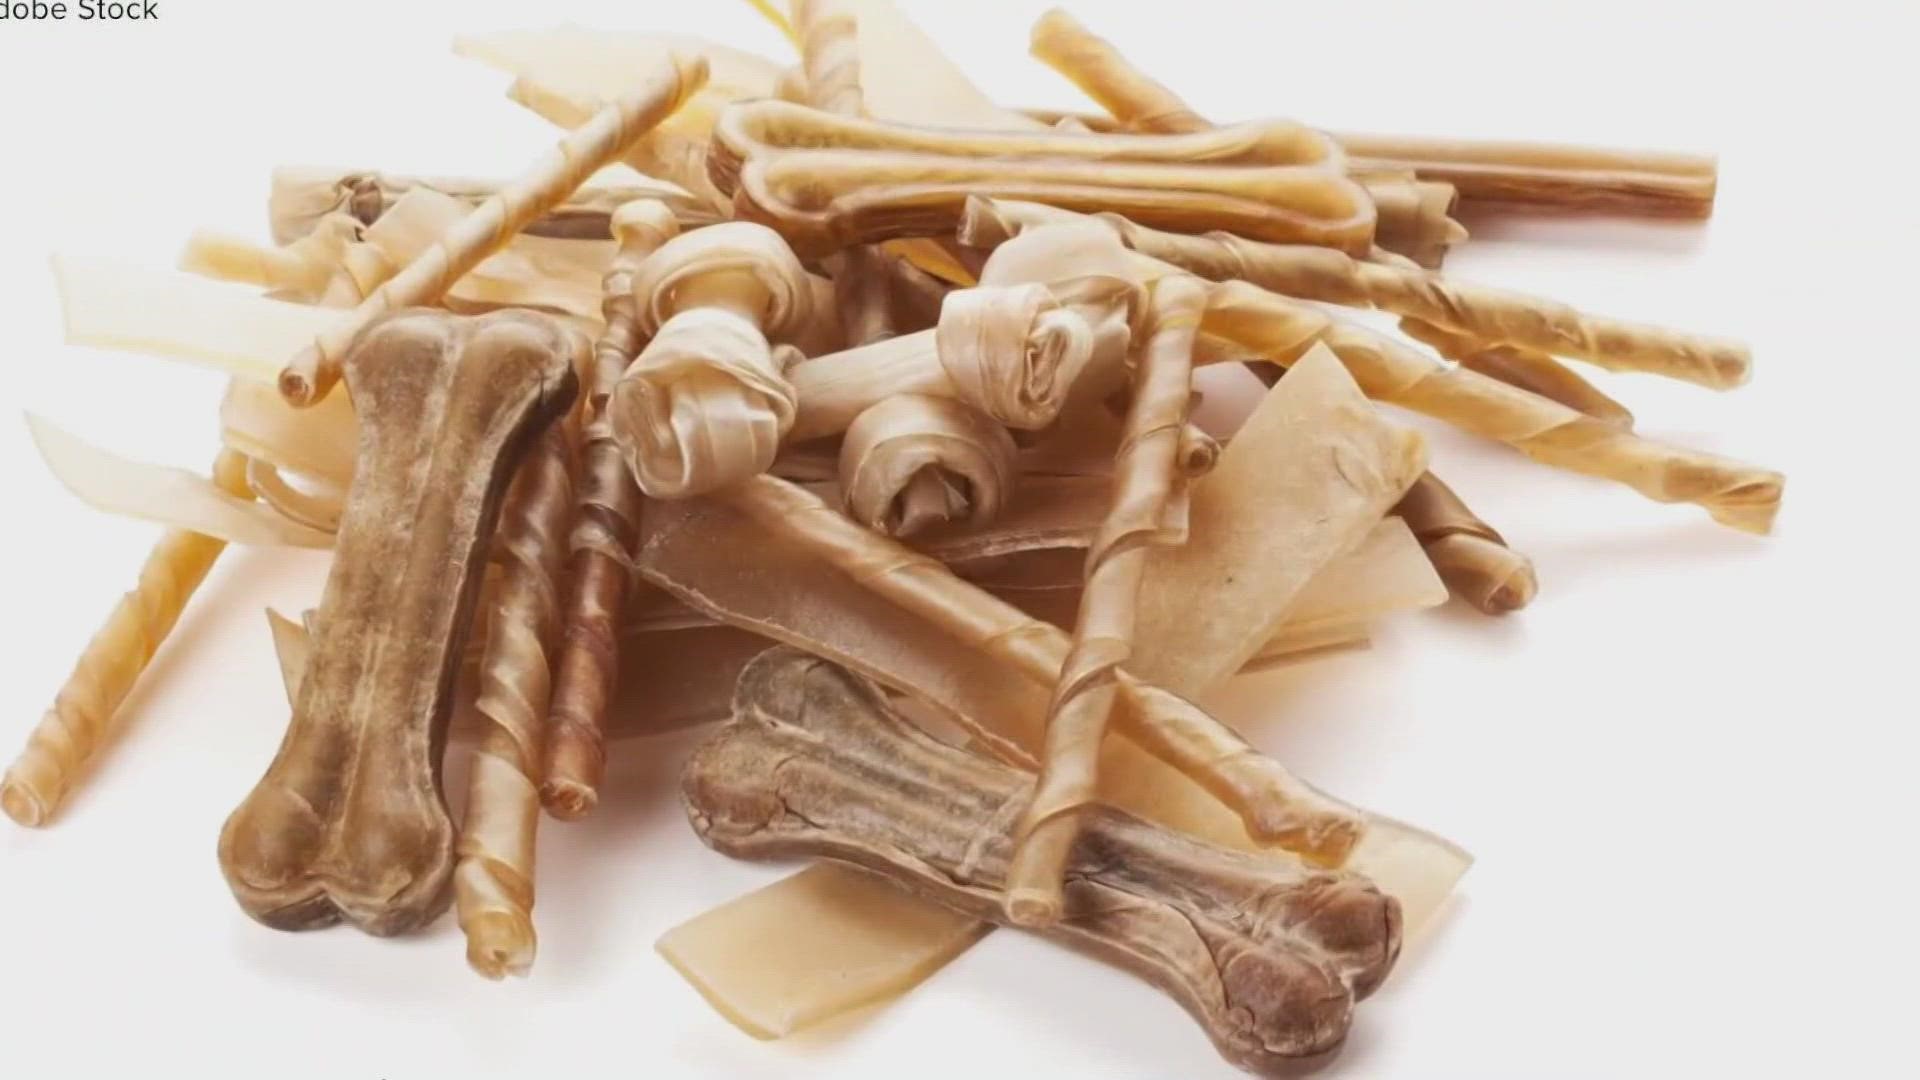 Social media posts claim rawhides are dangerous, but a NC vet says it depends on how your dog chews them.